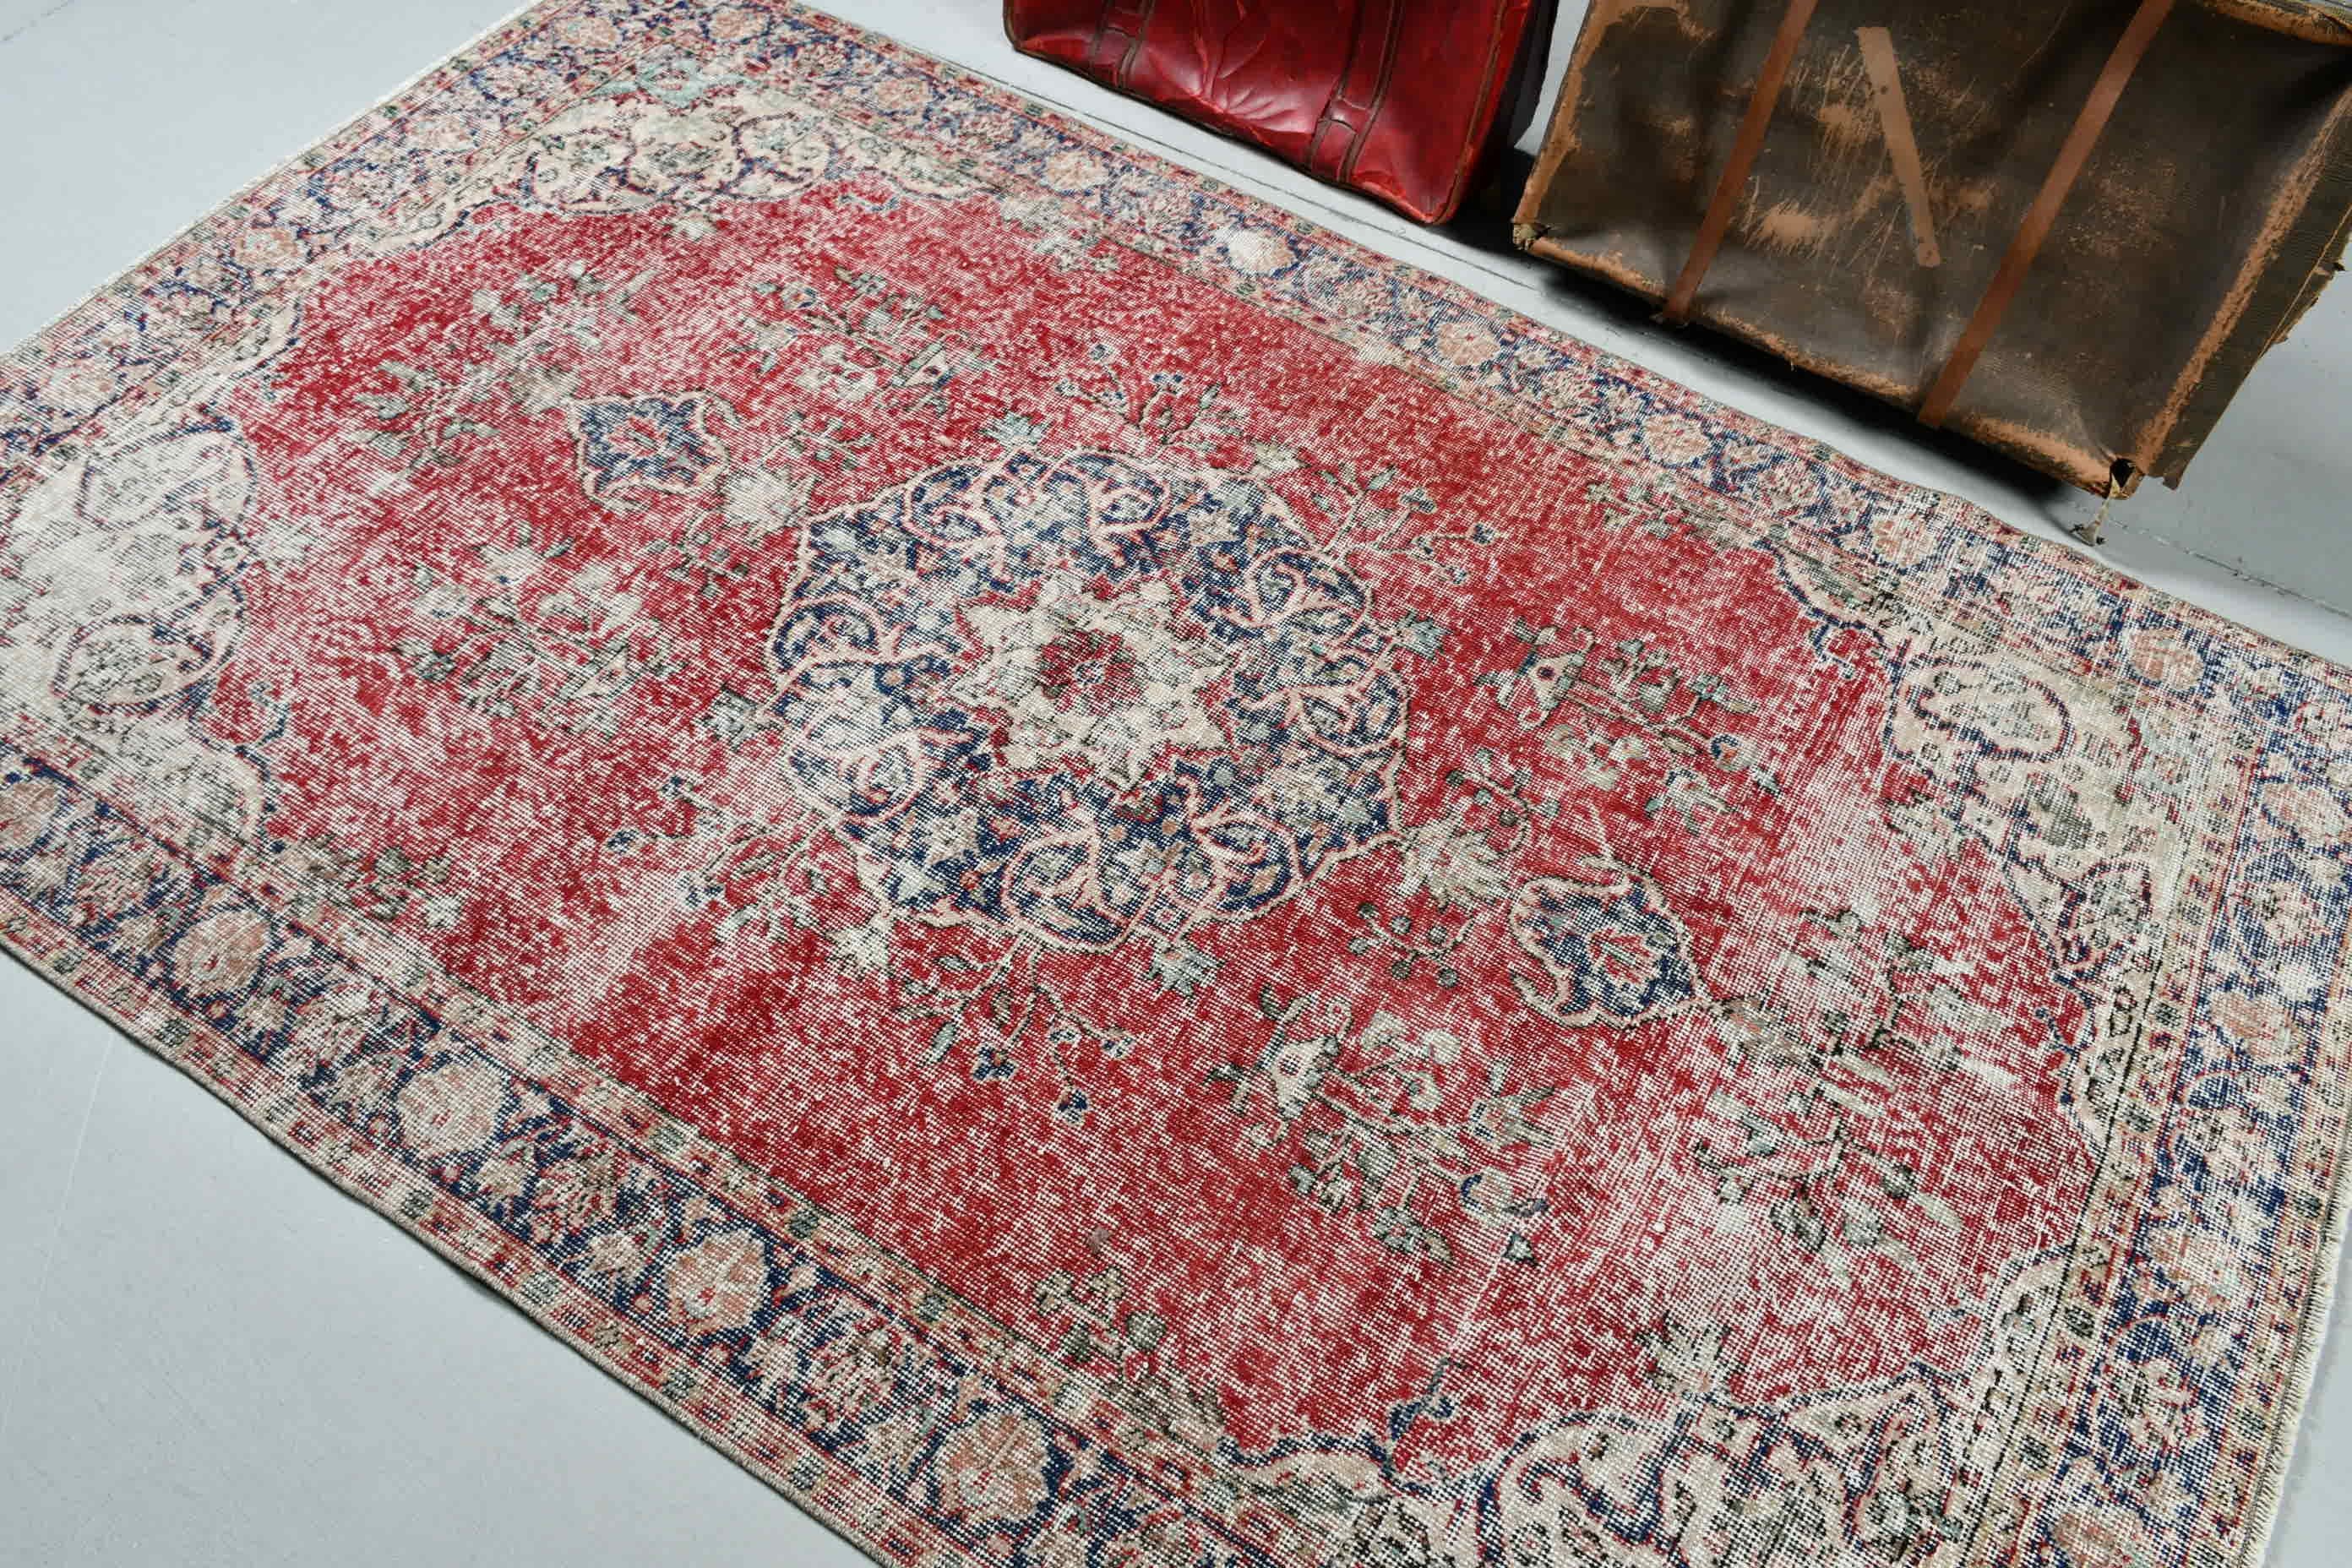 Kitchen Rugs, Oriental Rug, Home Decor Rugs, Rugs for Bedroom, Muted Rug, Turkish Rug, Vintage Rugs, Red  4.7x7.3 ft Area Rugs